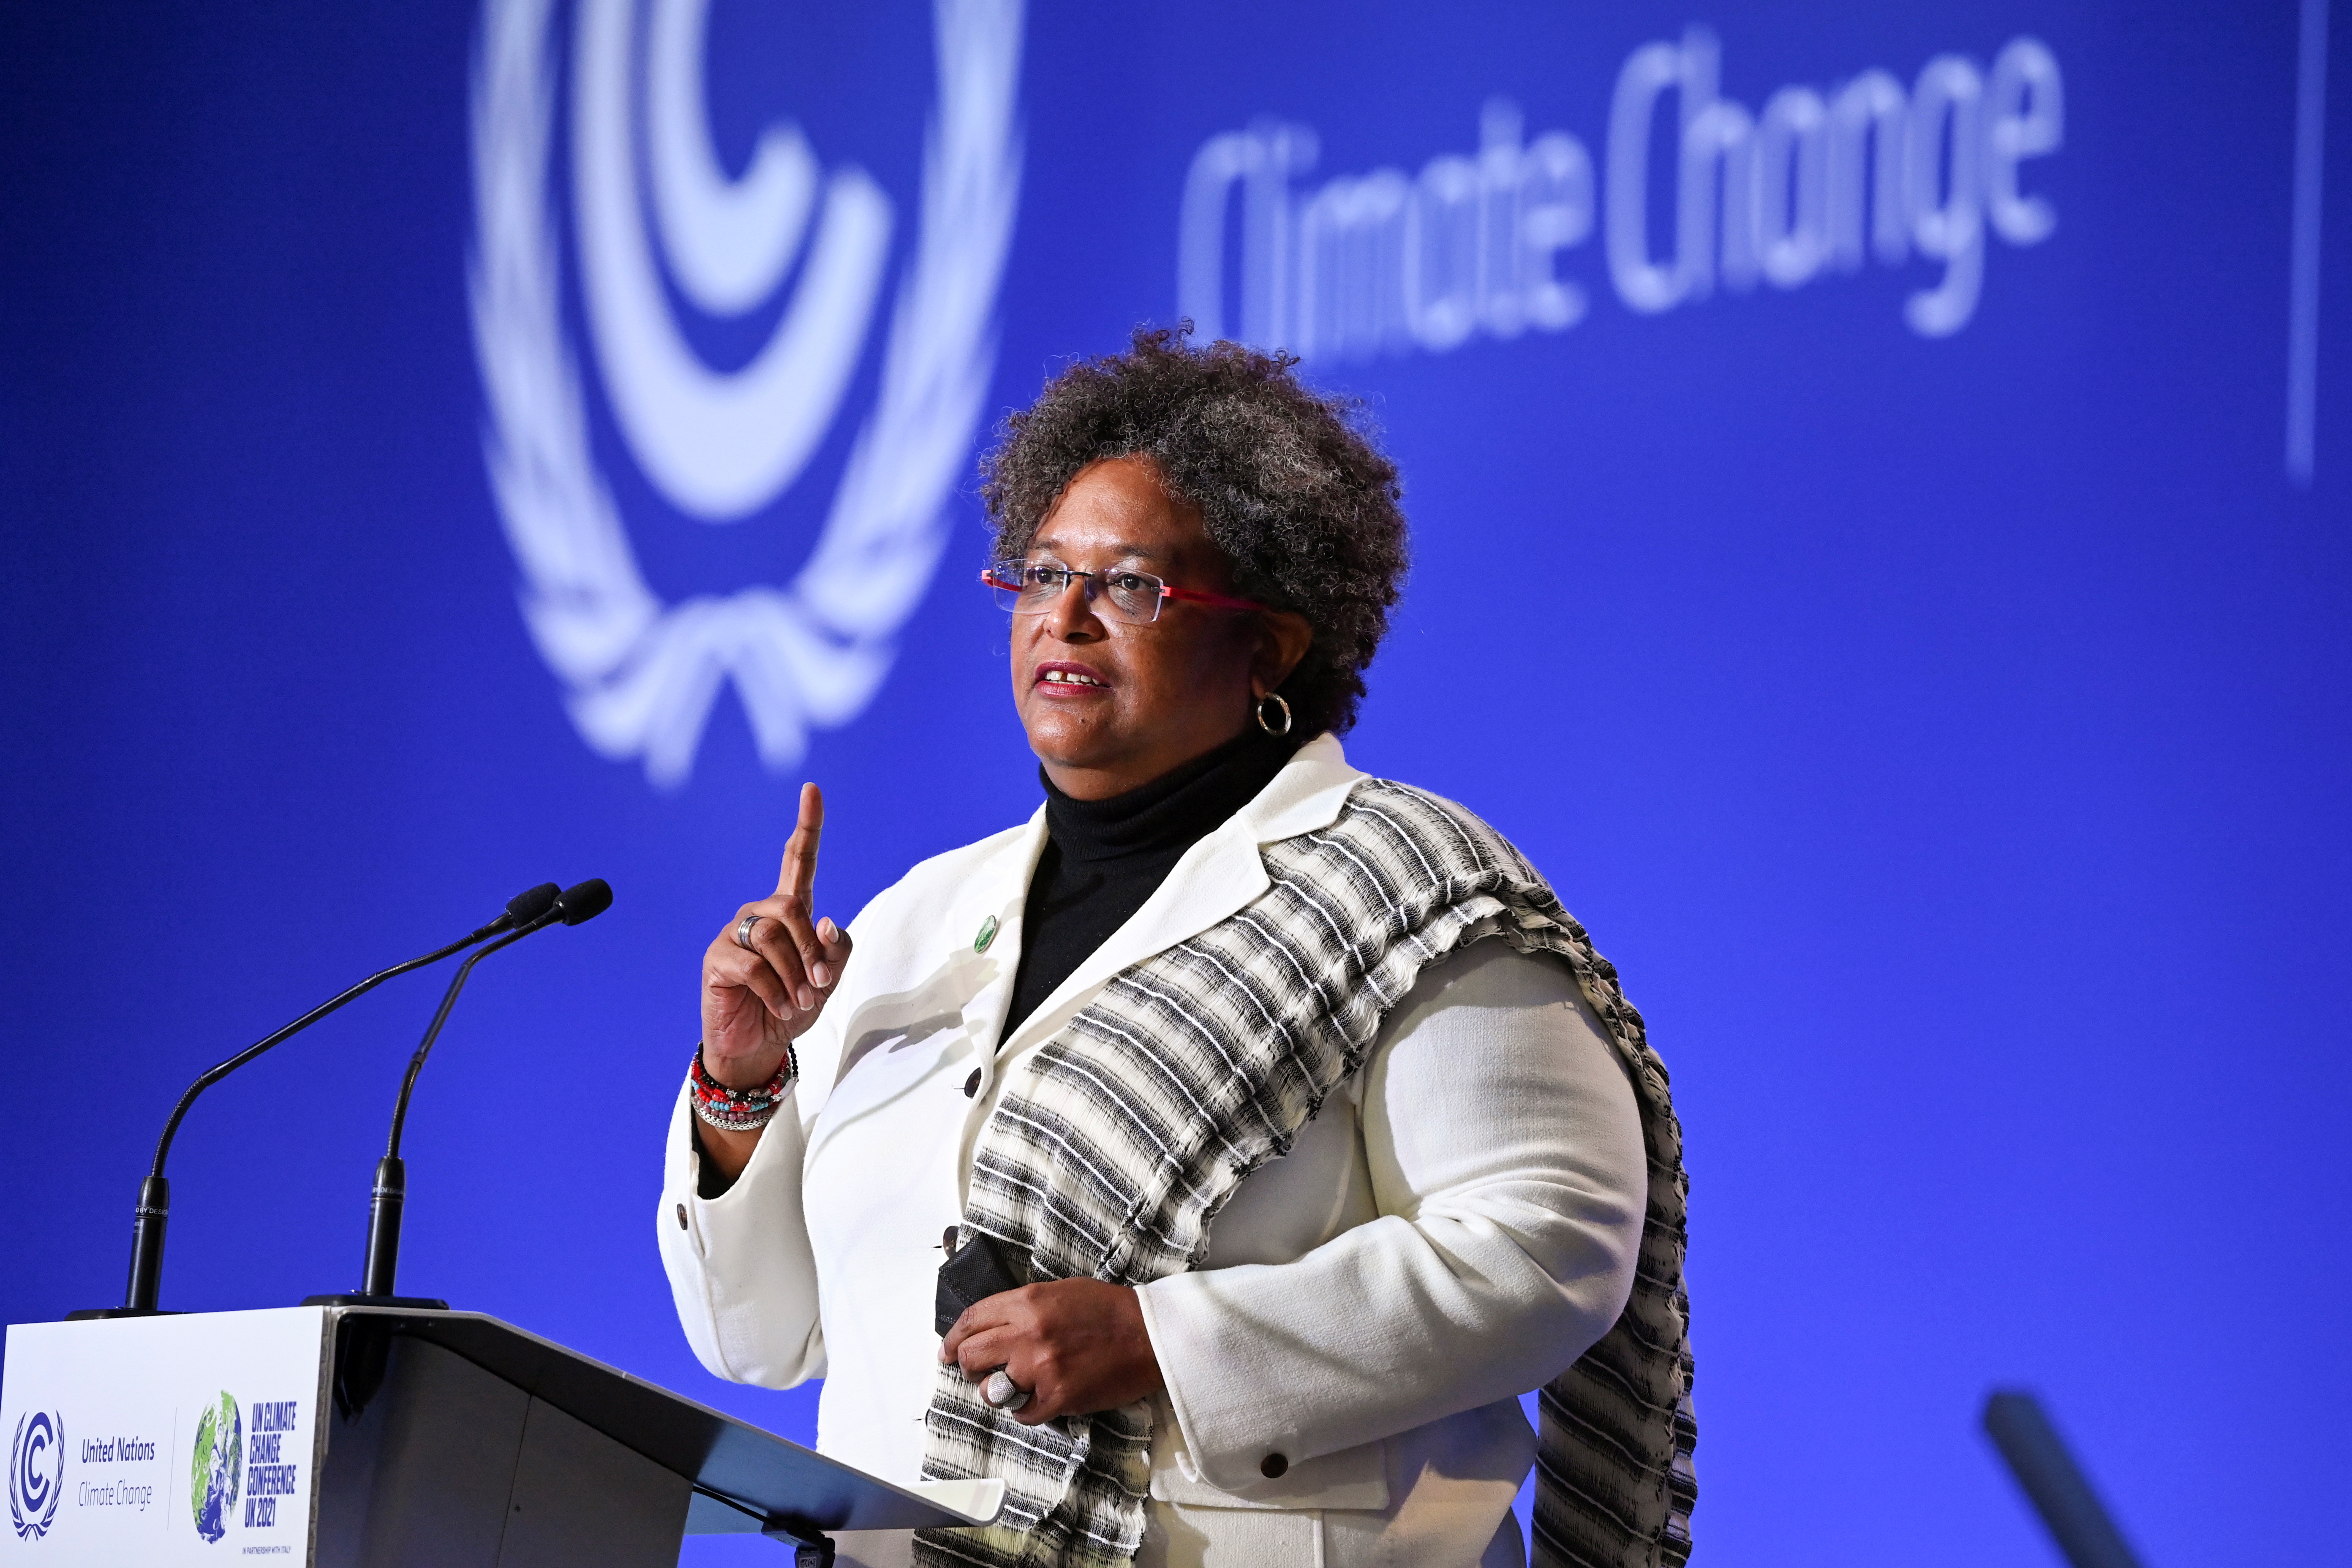 Barbados Prime Minister Mia Amor Mottley speaks during the opening ceremony of the UN Climate Change Conference (COP26) in Glasgow, Scotland, Britain November 1, 2021. Jeff J Mitchell/Pool via REUTERS